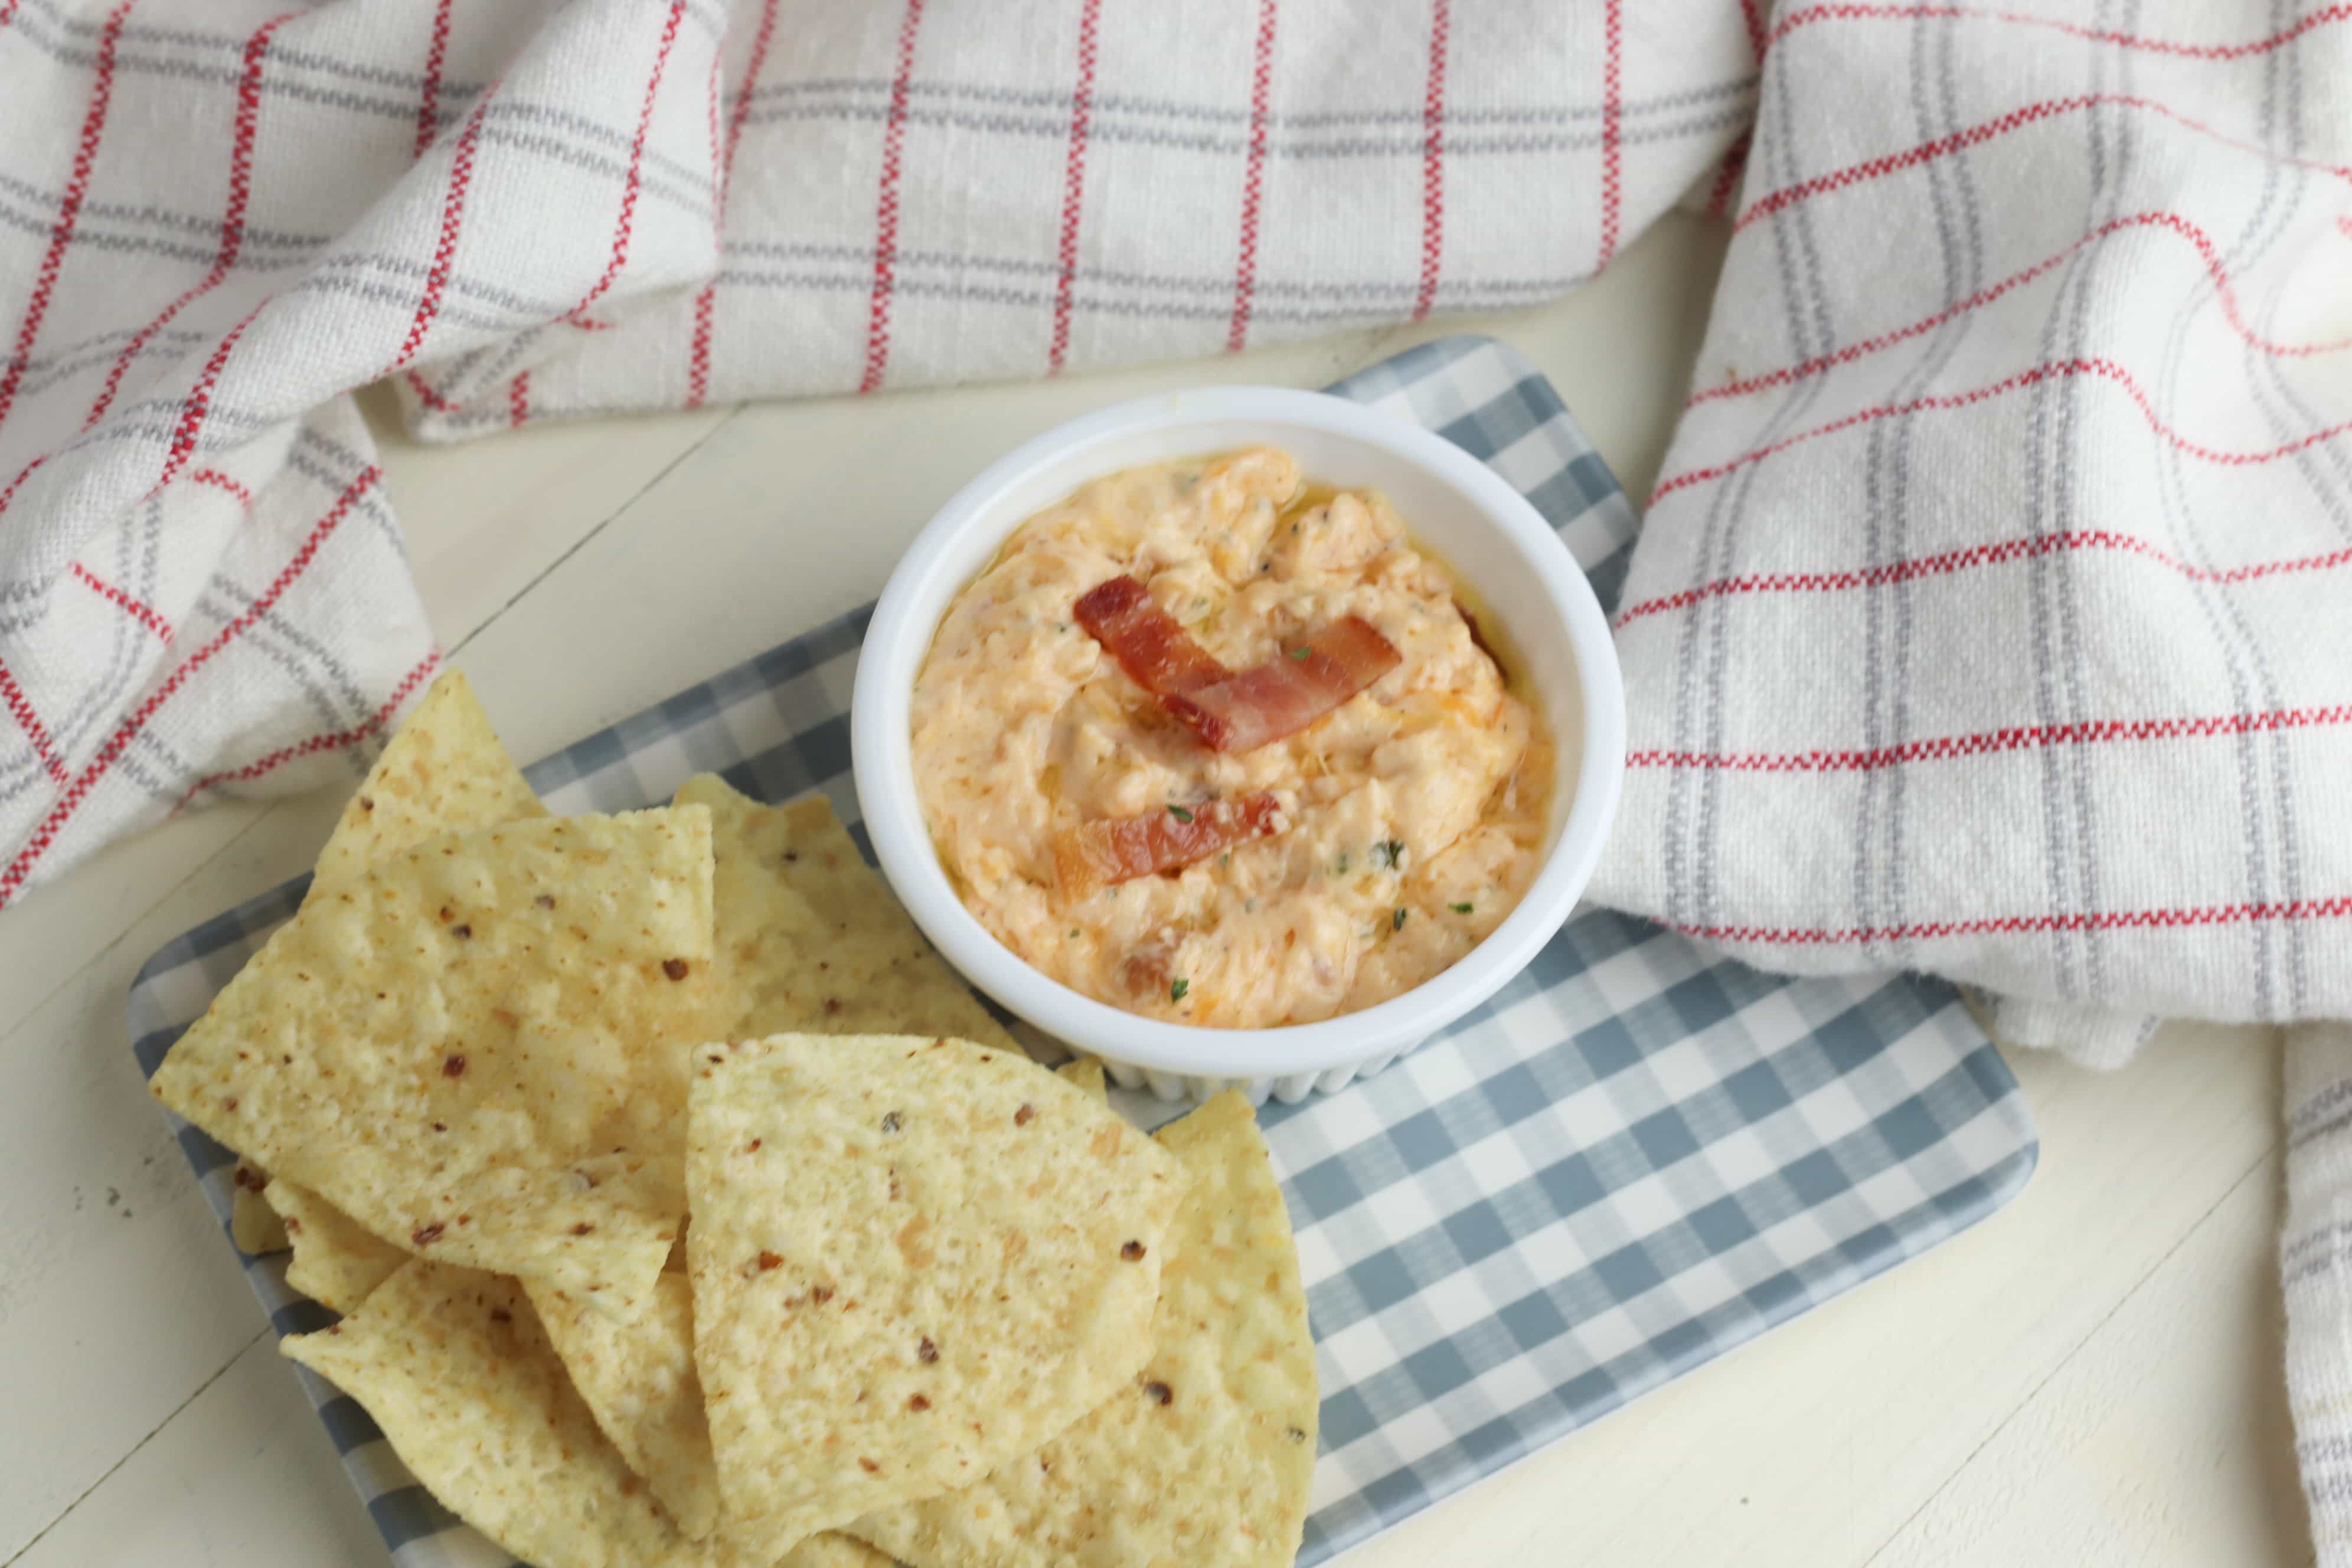 Here is a super easy and delicious bacon cheddar dip that is a sure crowd pleaser! This dip is made on the stove, served warm with chips or crackers. Three easy main ingredients include cream cheese, bacon and cheddar cheese. #appetizers #dips #cheesedip